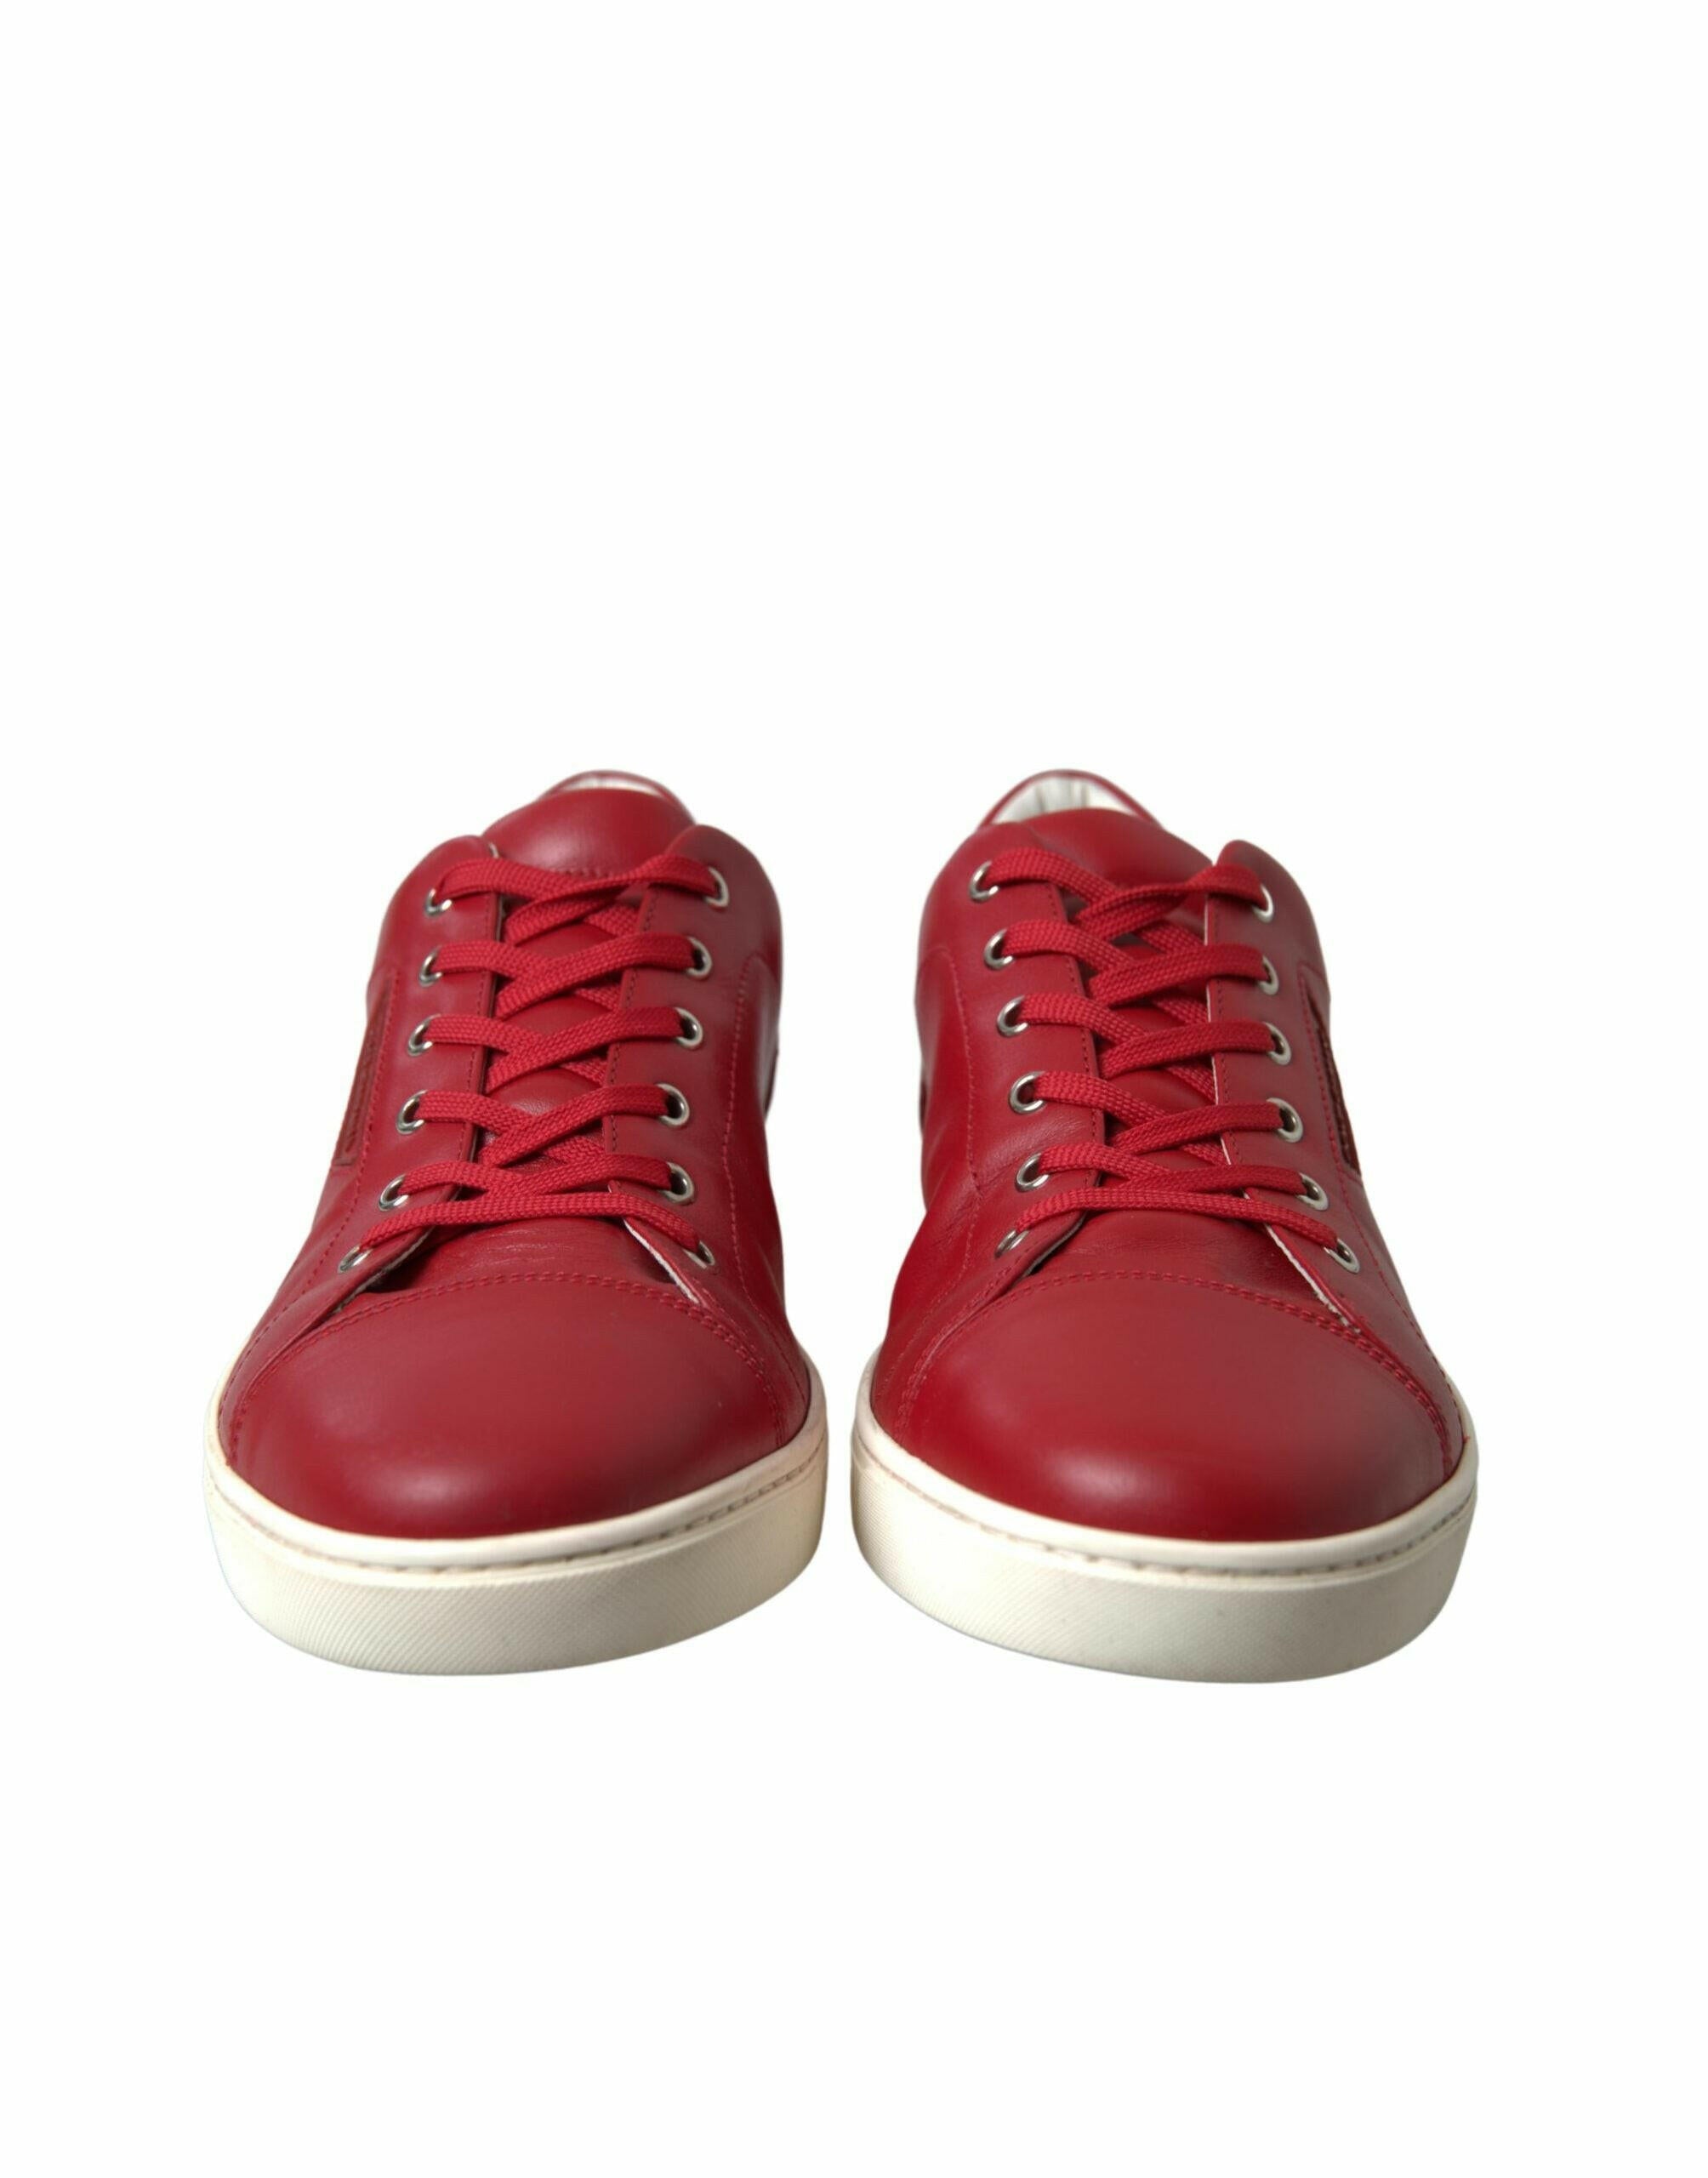 Dolce & Gabbana Shoes Red Portofino Leather Low Top Mens Sneakers - GENUINE AUTHENTIC BRAND LLC  